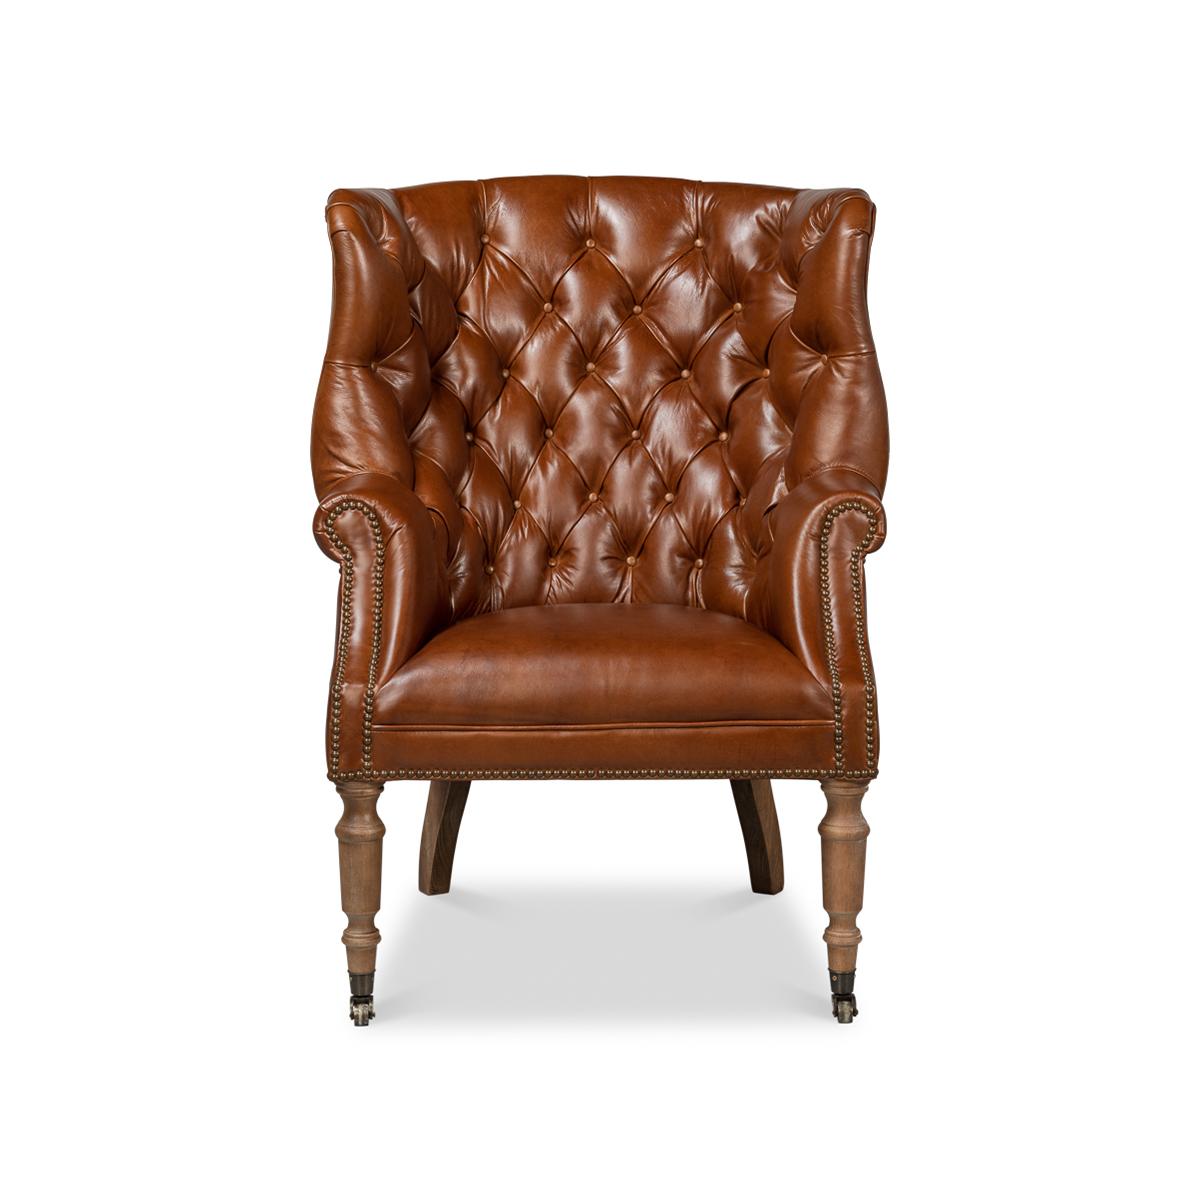 A wonderful George III style barrel back wingchair with top-grain Vintage Havana Leather, a tufted upholstery barrel backrest with winged sides, rolled arms and a padded seat. Finished with brass nailhead trim and raised on cerused turned front legs